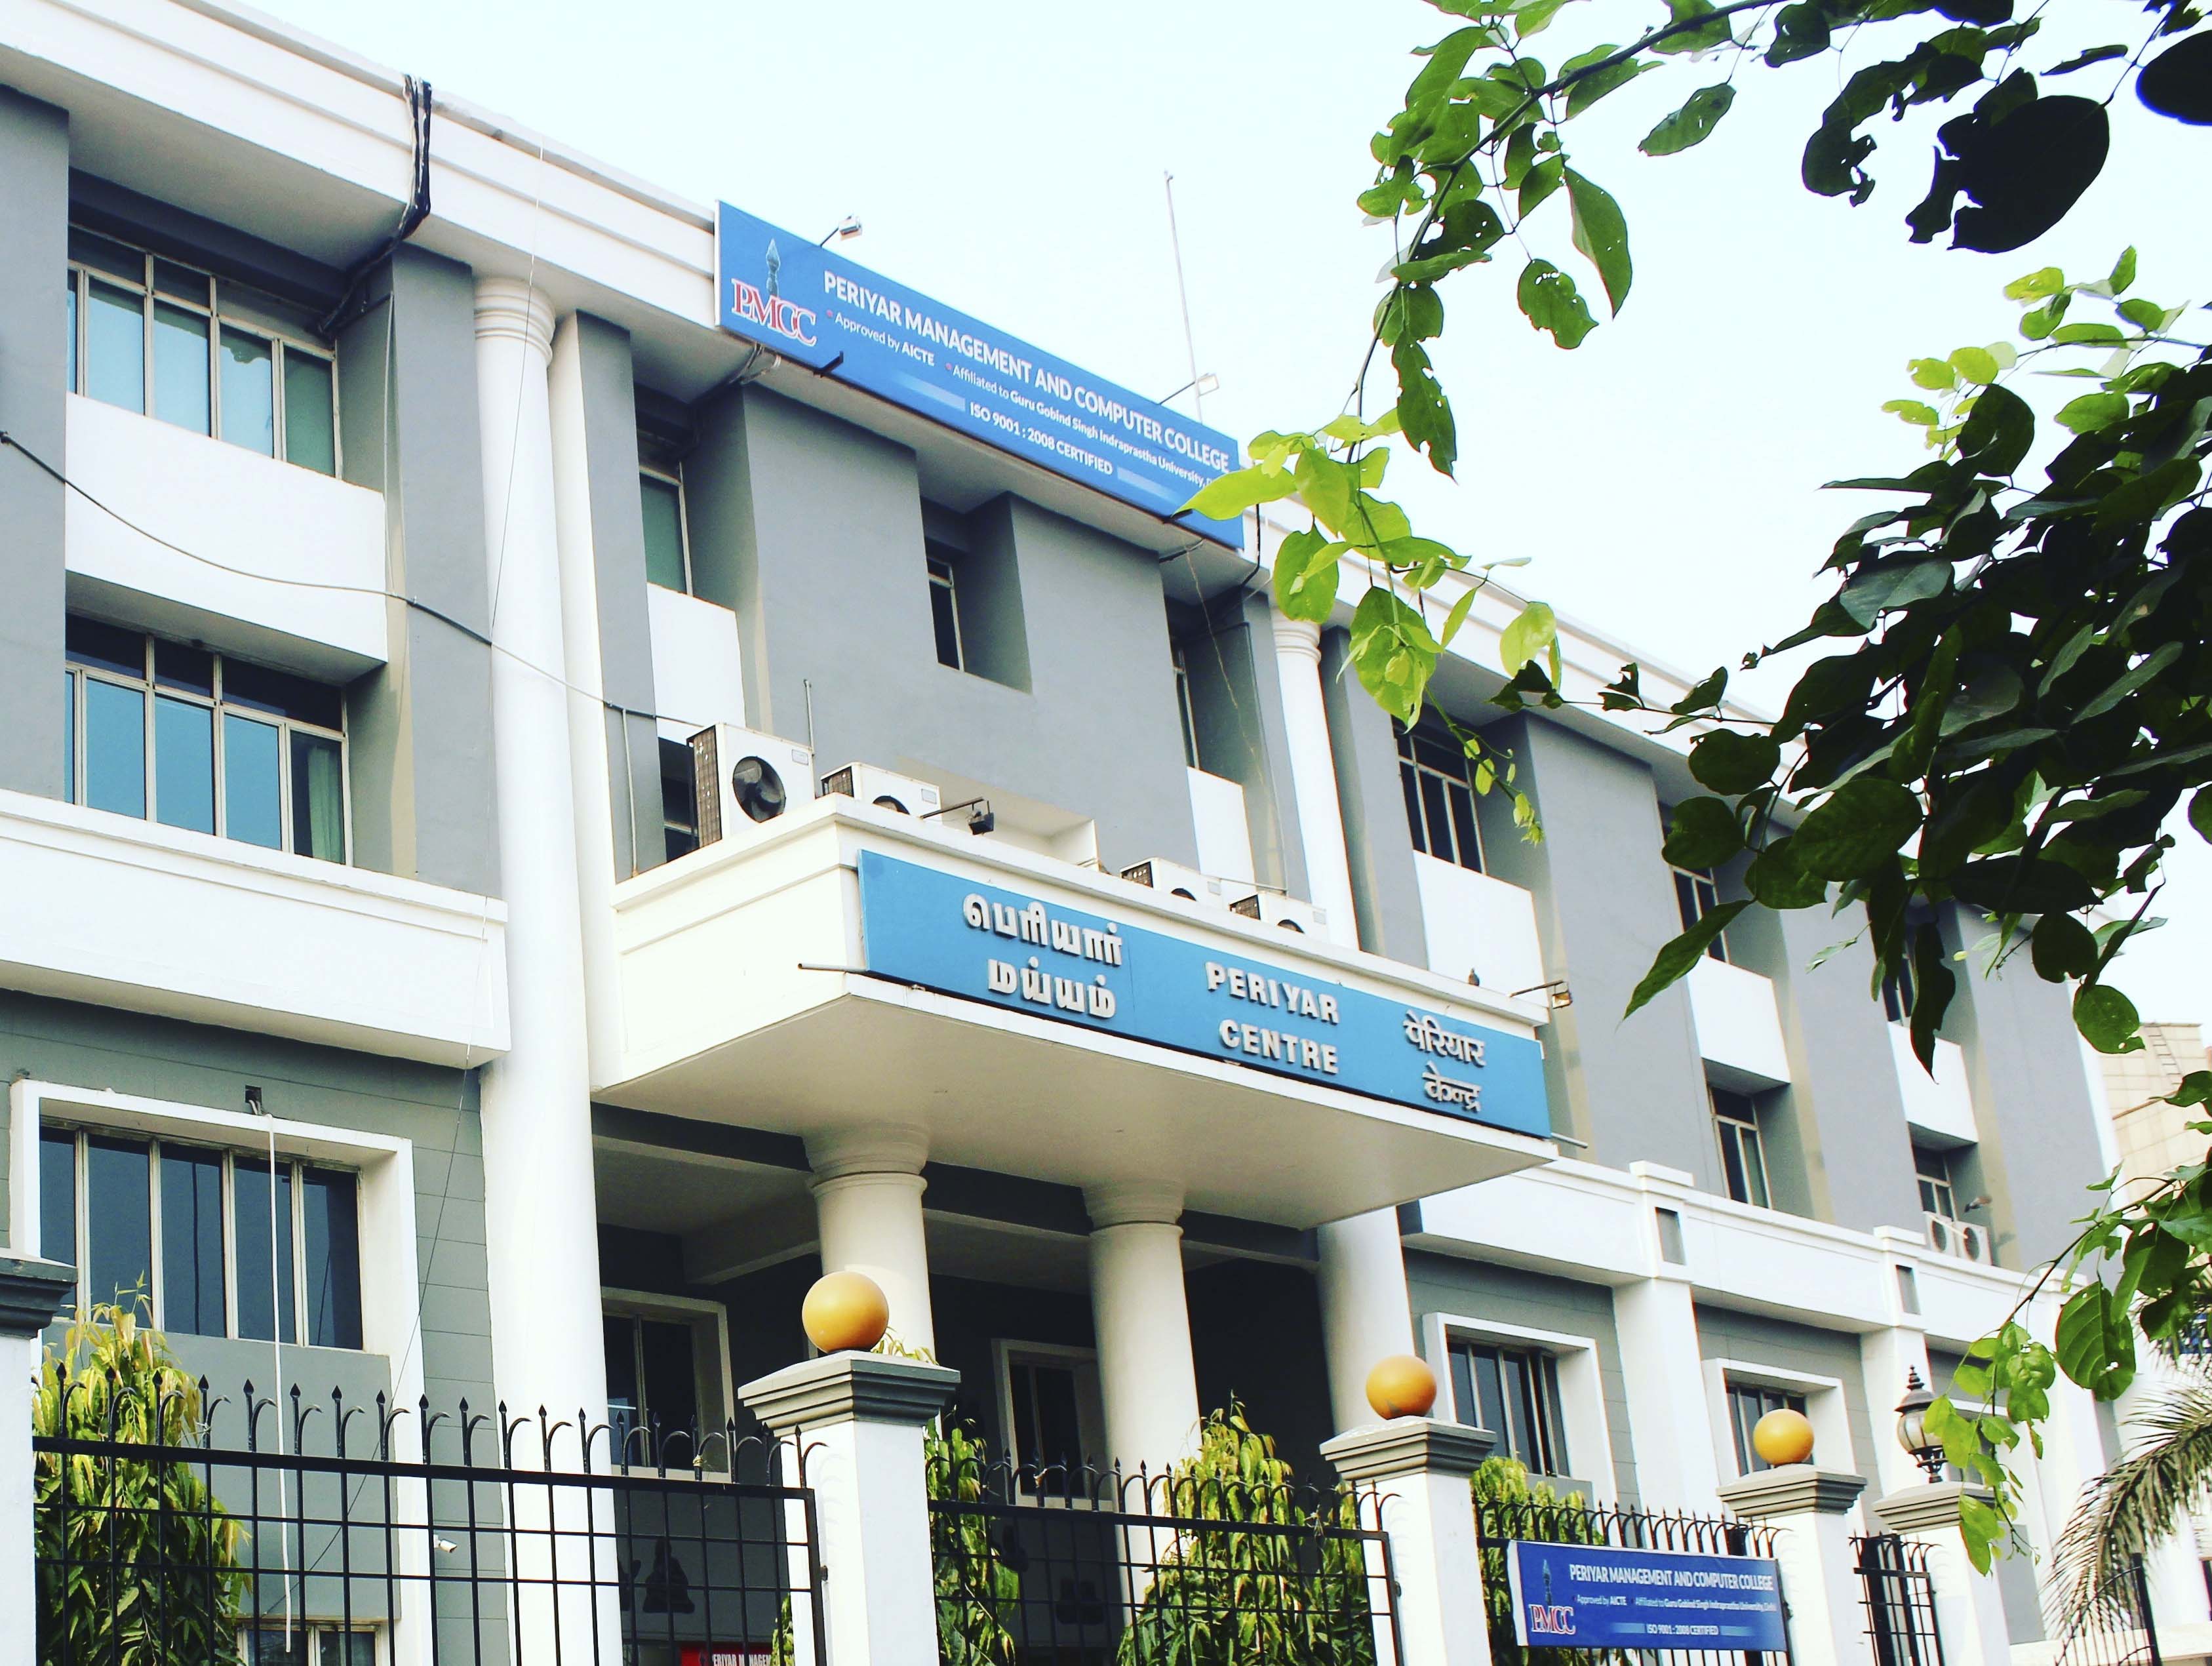 Periyar Management and Computer College, New Delhi Image